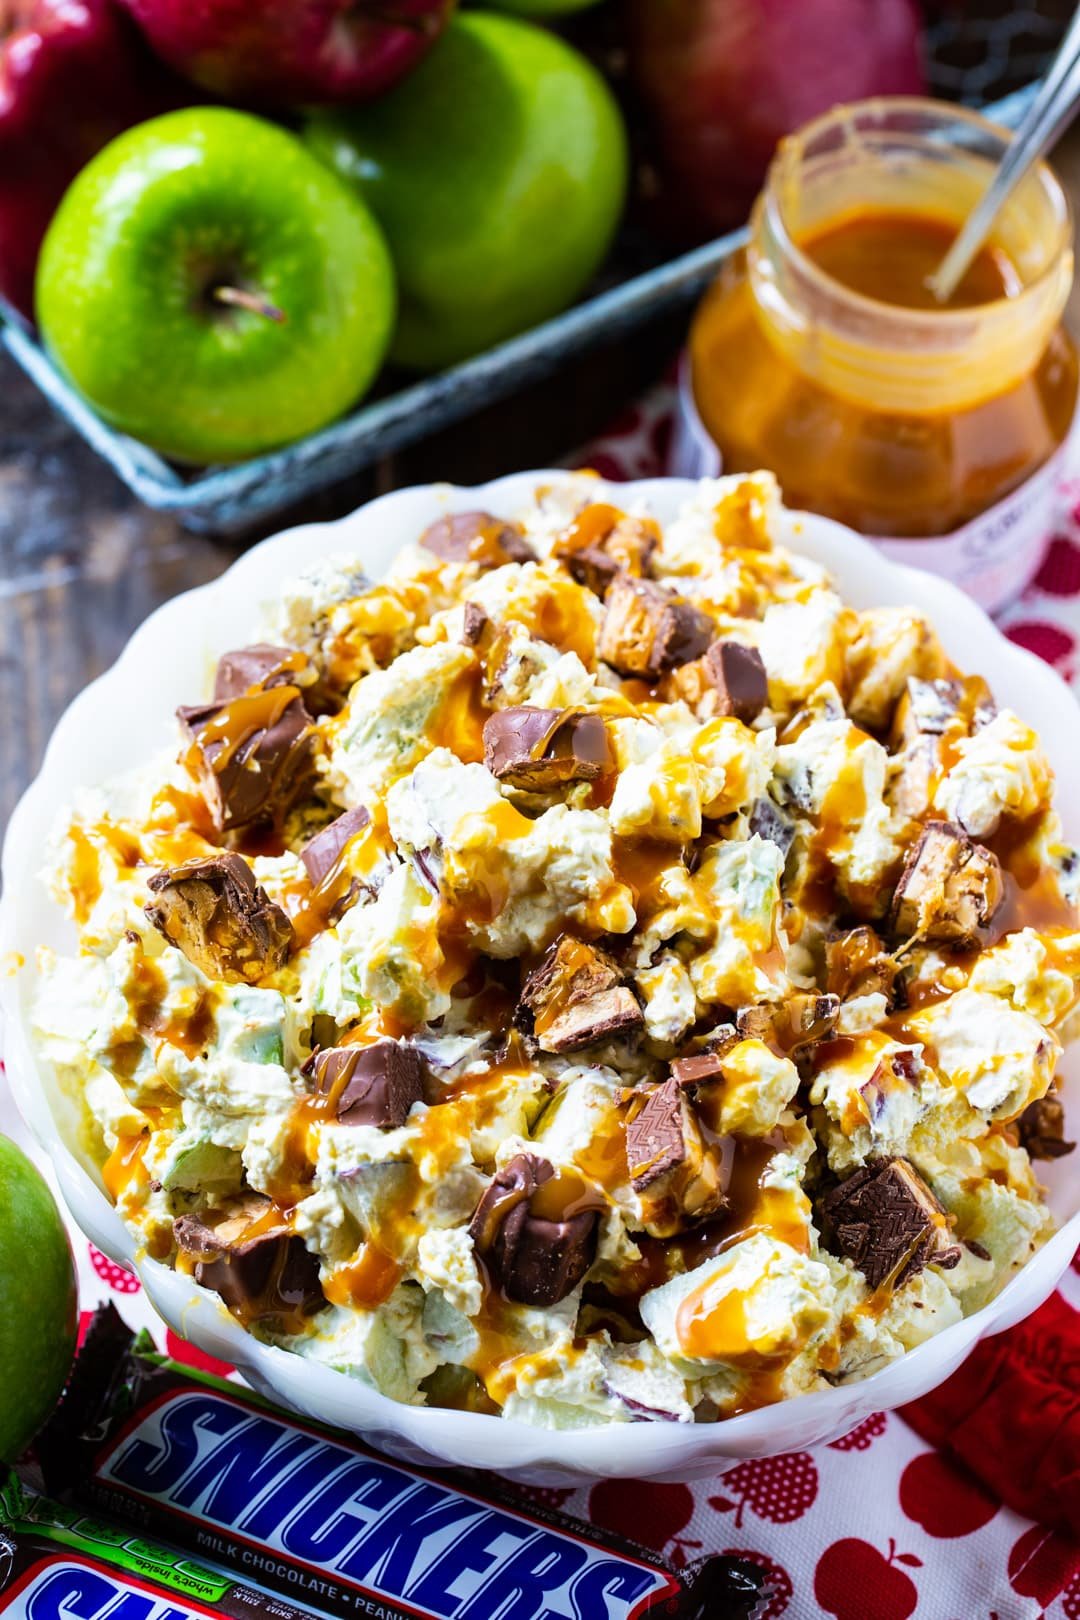 Apple Salad in a bowl surrounded by whole apples and snickers bars.